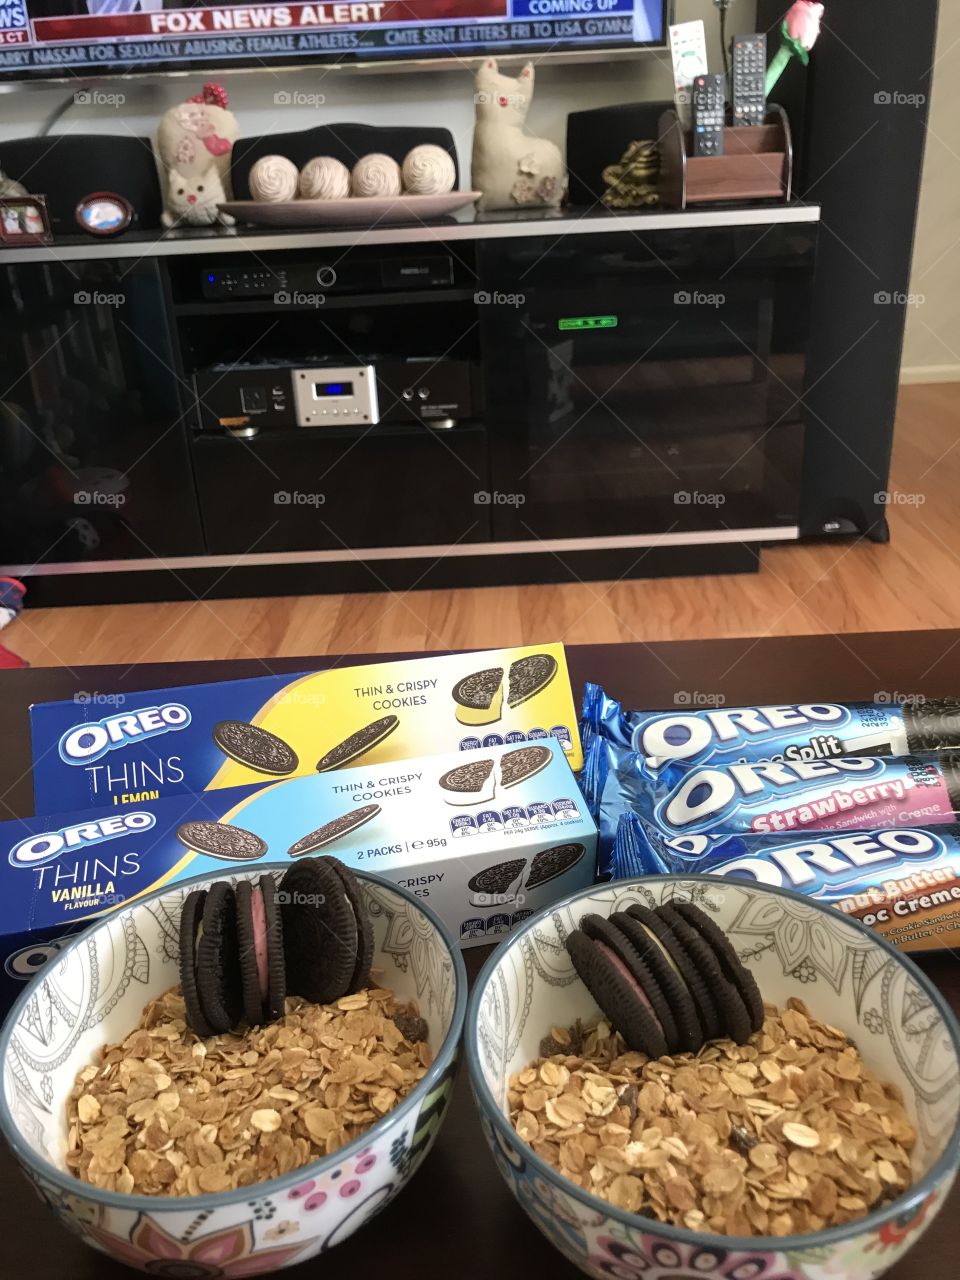 Having breakfast with favourite cookie Areo and cereal at home Cheltenham Melbourne Australia 